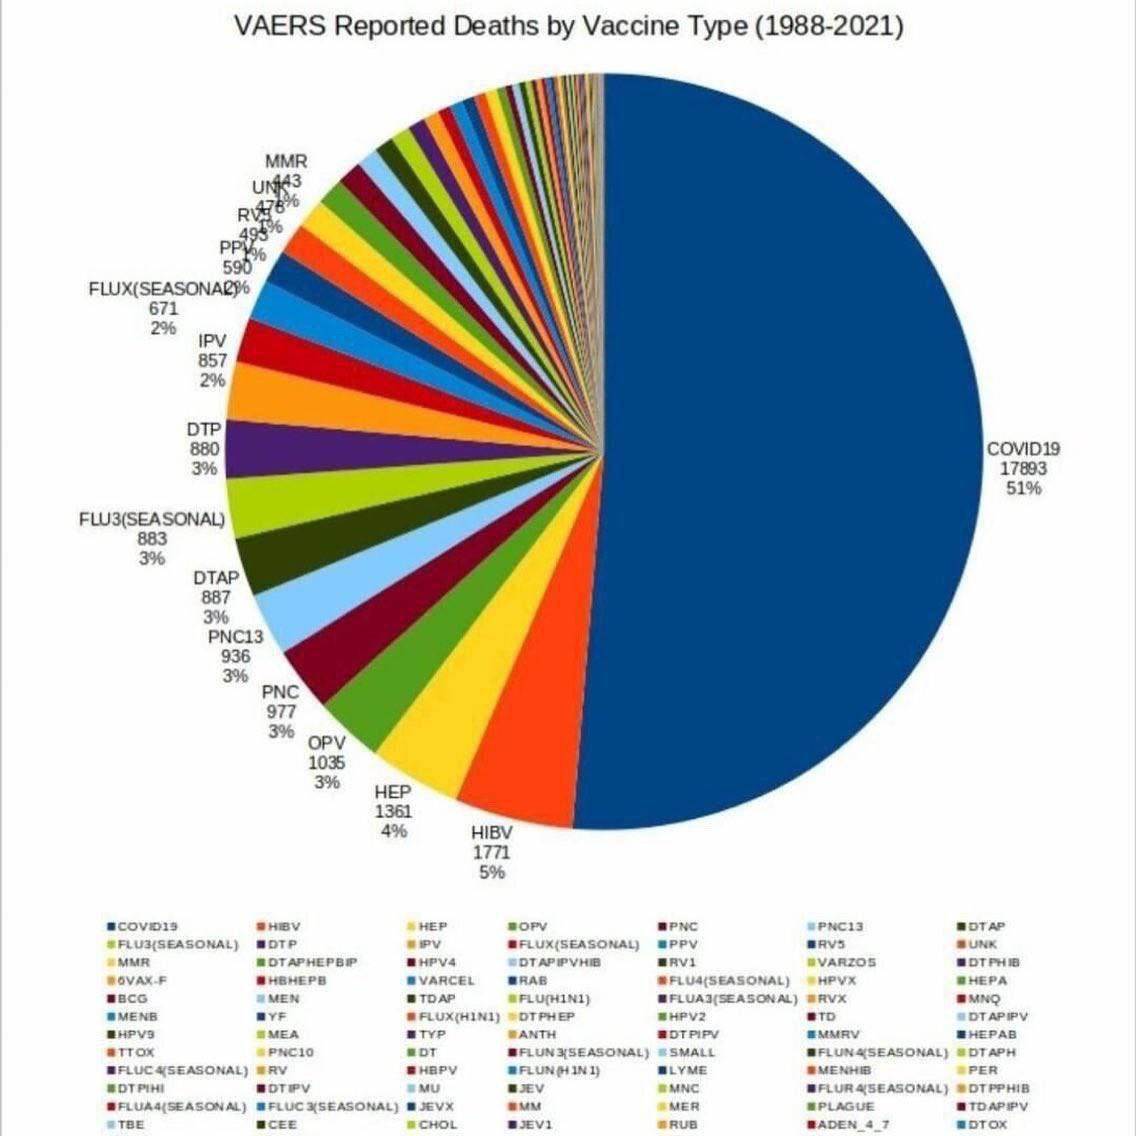 VAERS data on all vaccine deaths from 1988 to 2021. Covid vaccine deaths in One year are equivalent to deaths of all other vaccines in 33 years. The Hidden Truth 👉